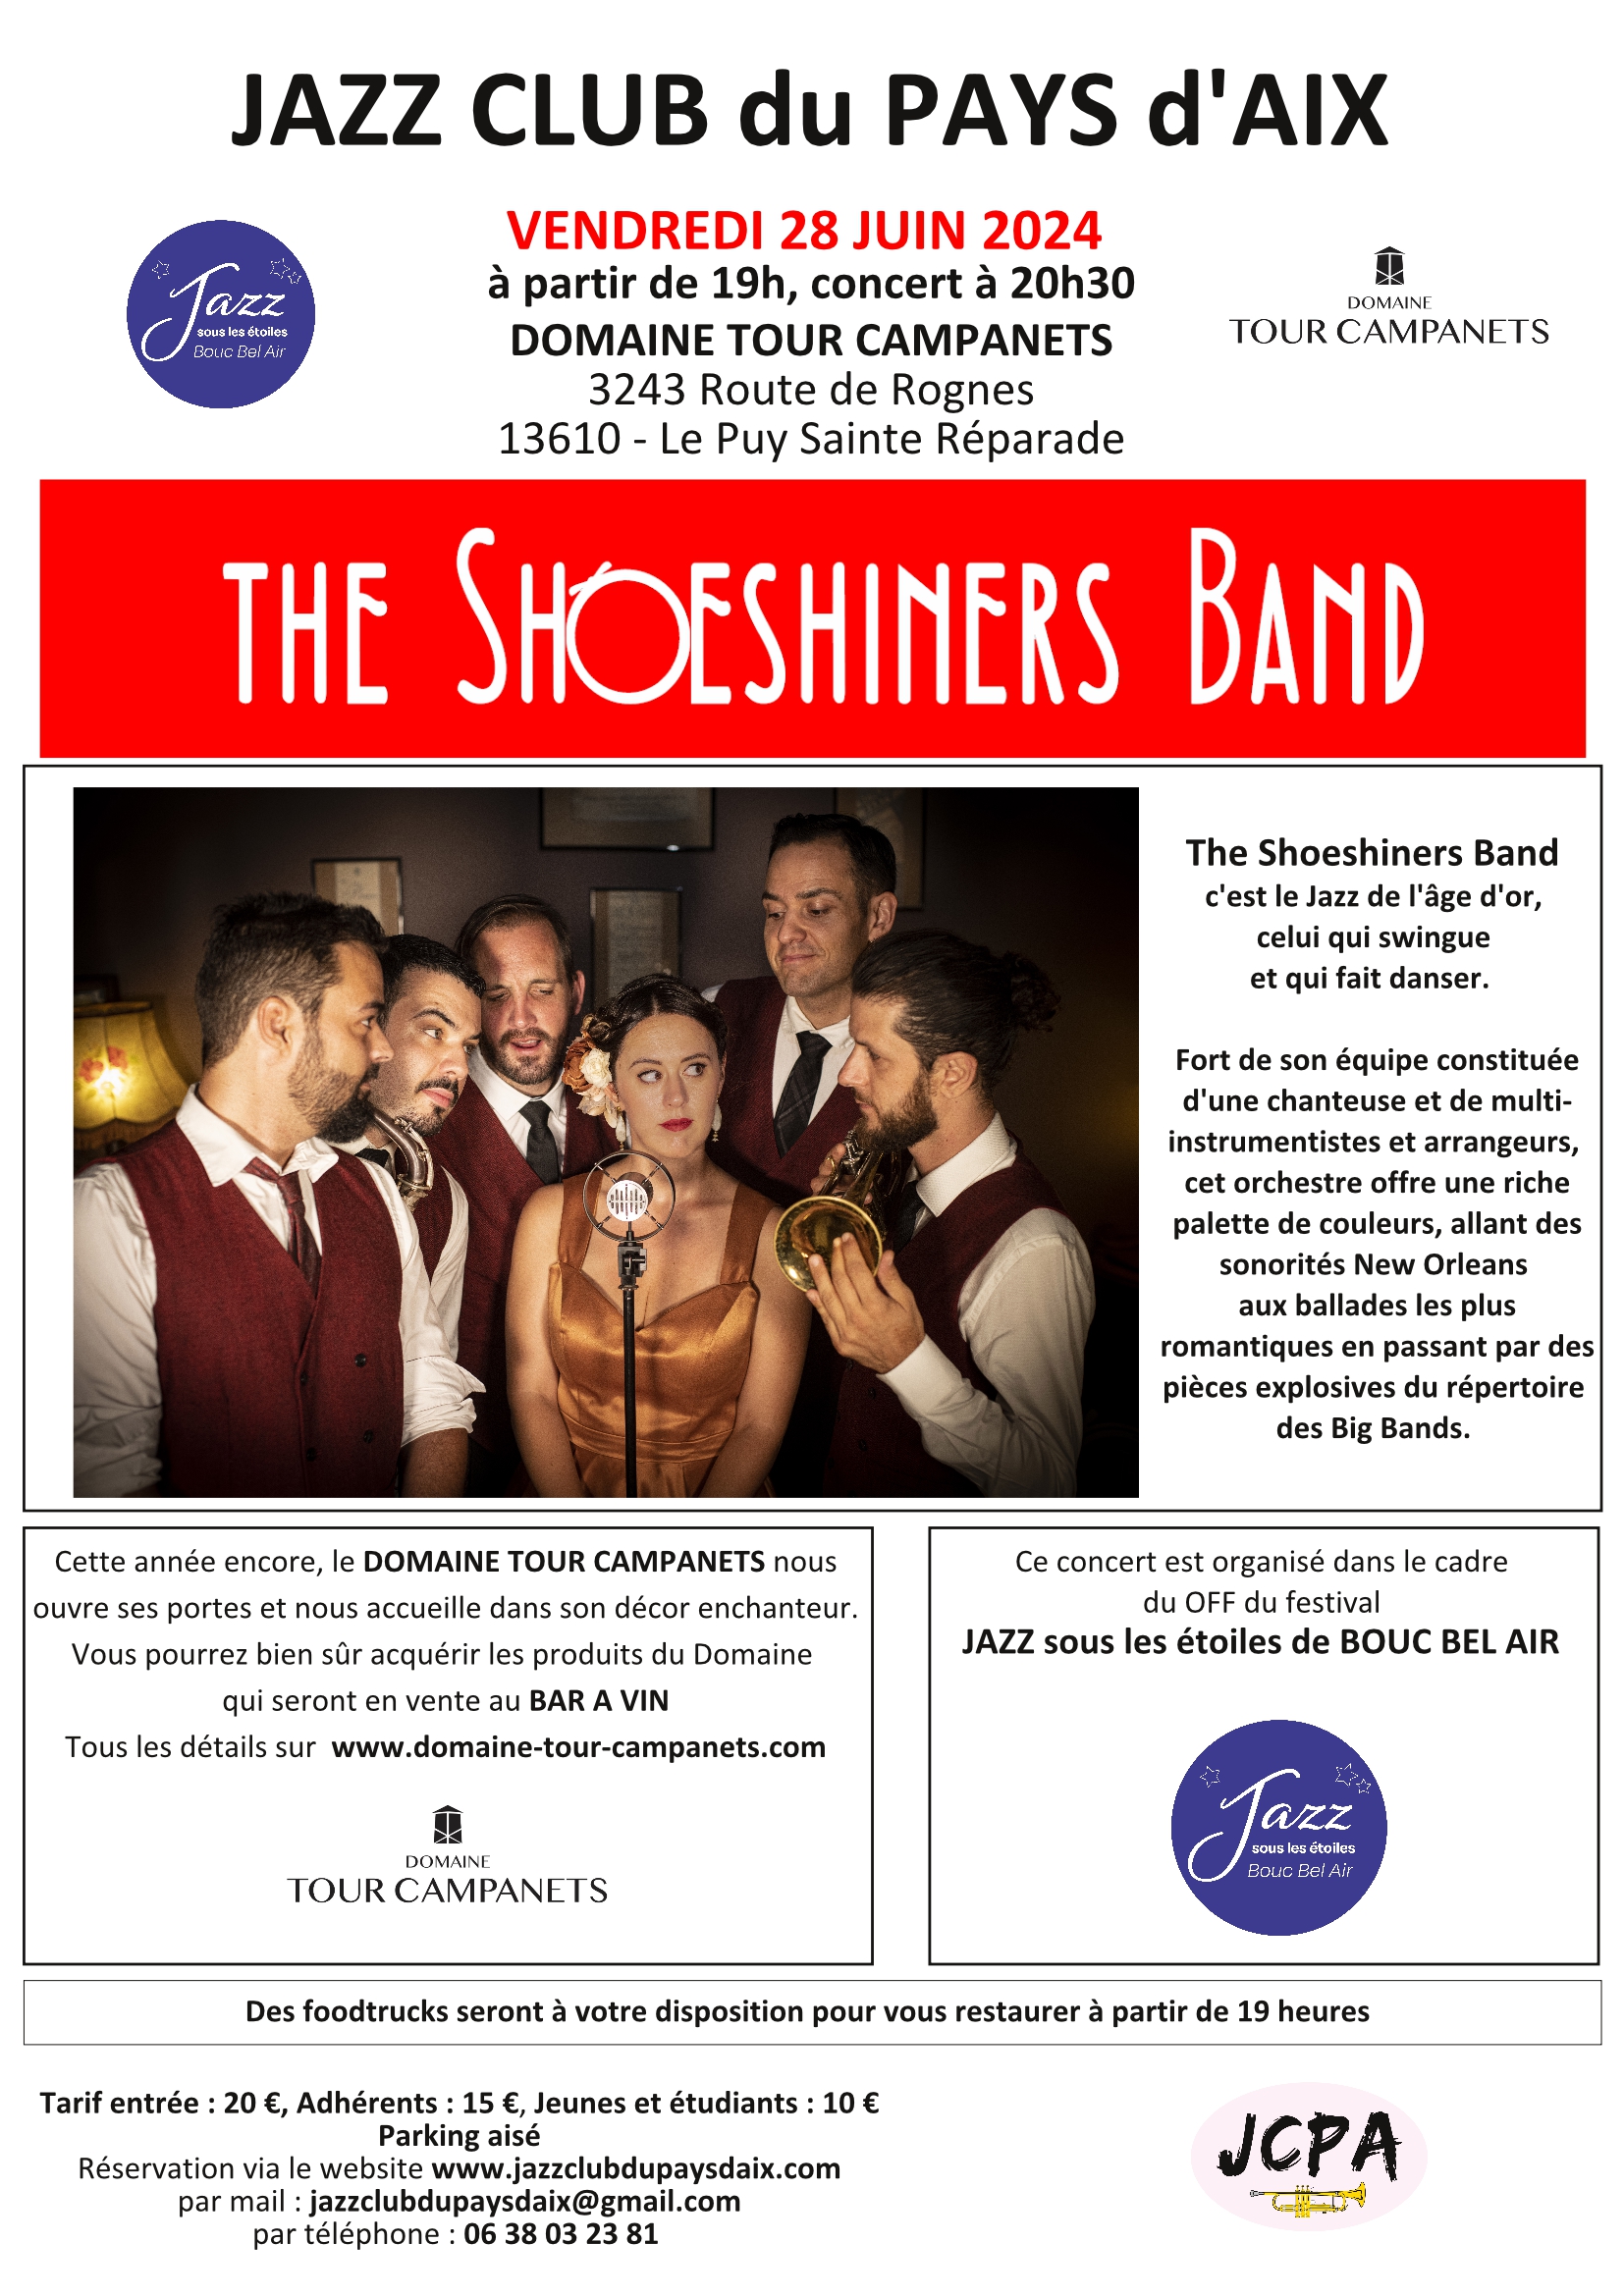 JCPA - CONCERT THE SHOESHINERS BAND